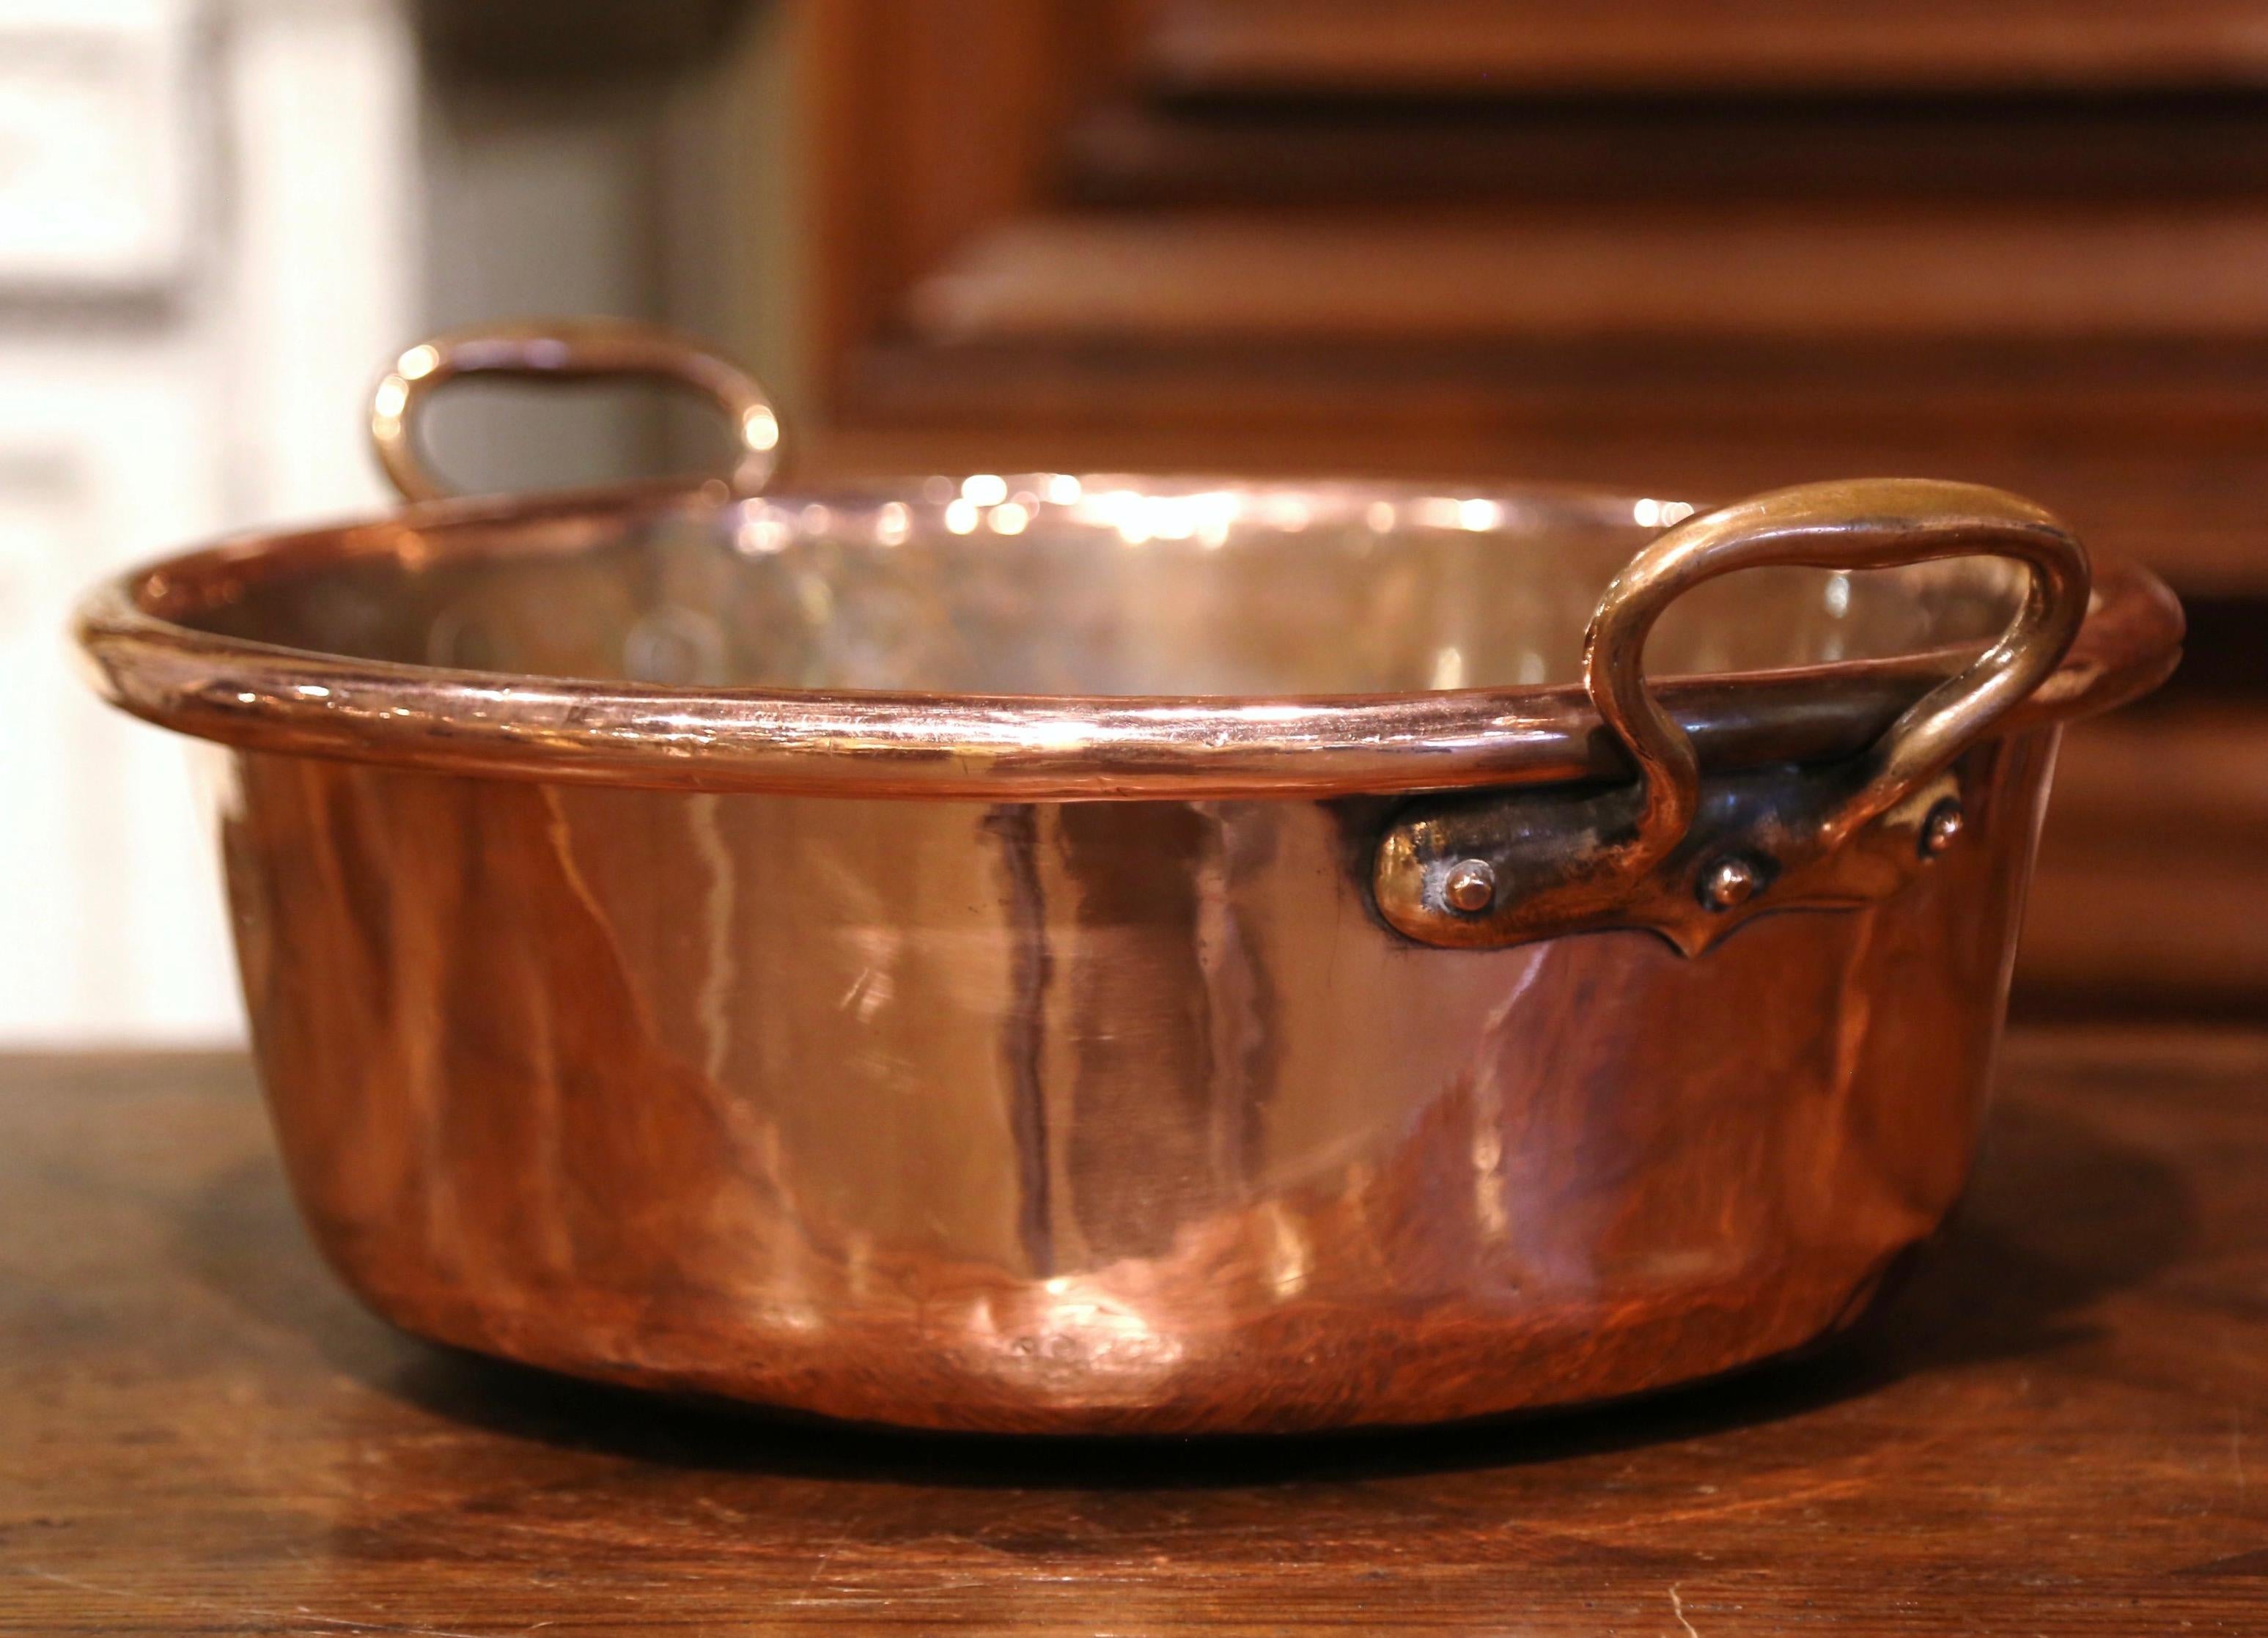 Bring an authentic French countryside touch to your kitchen with this large antique copper marmalade bowl. Crafted in Normandy, France, circa 1870, the decorative “Bassine a Confiture” (jam bowl) is round in shape and dressed with two brass side